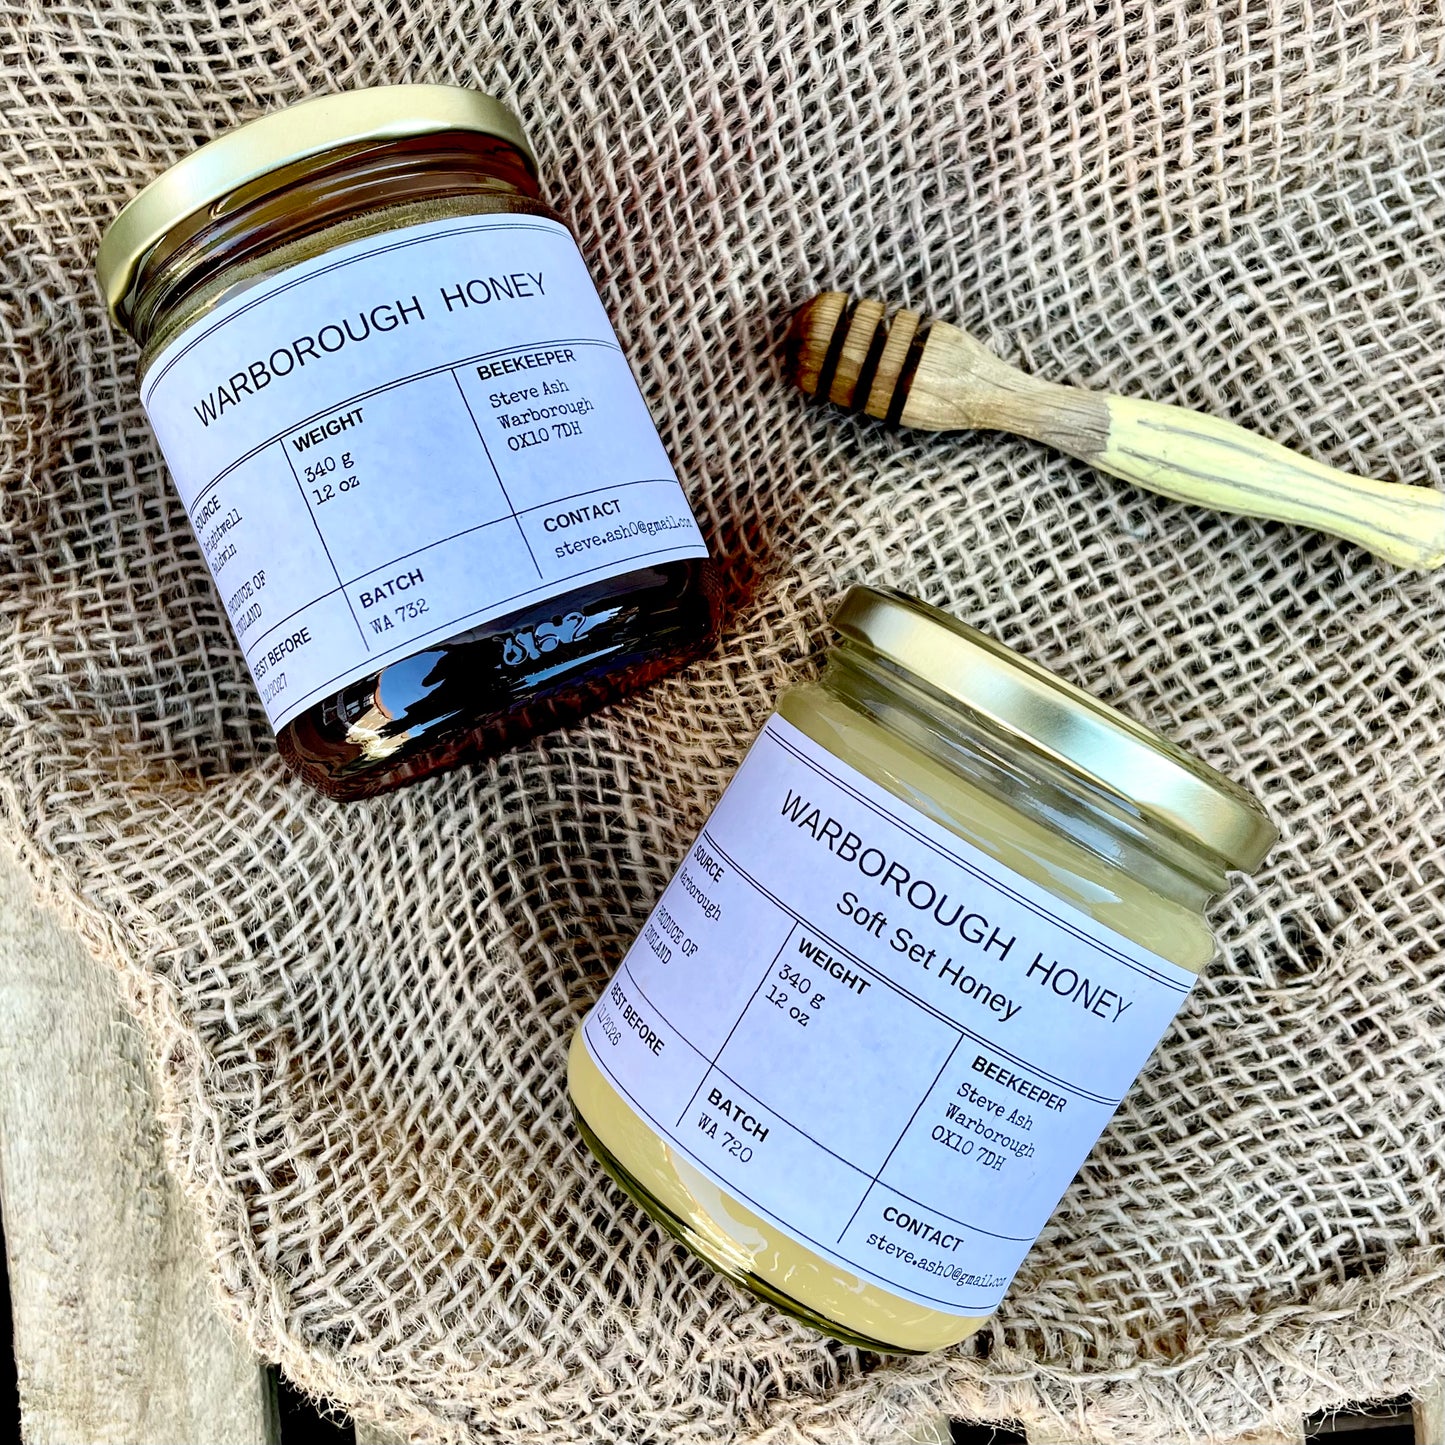 Warborough Runny Honey (Sold Out)